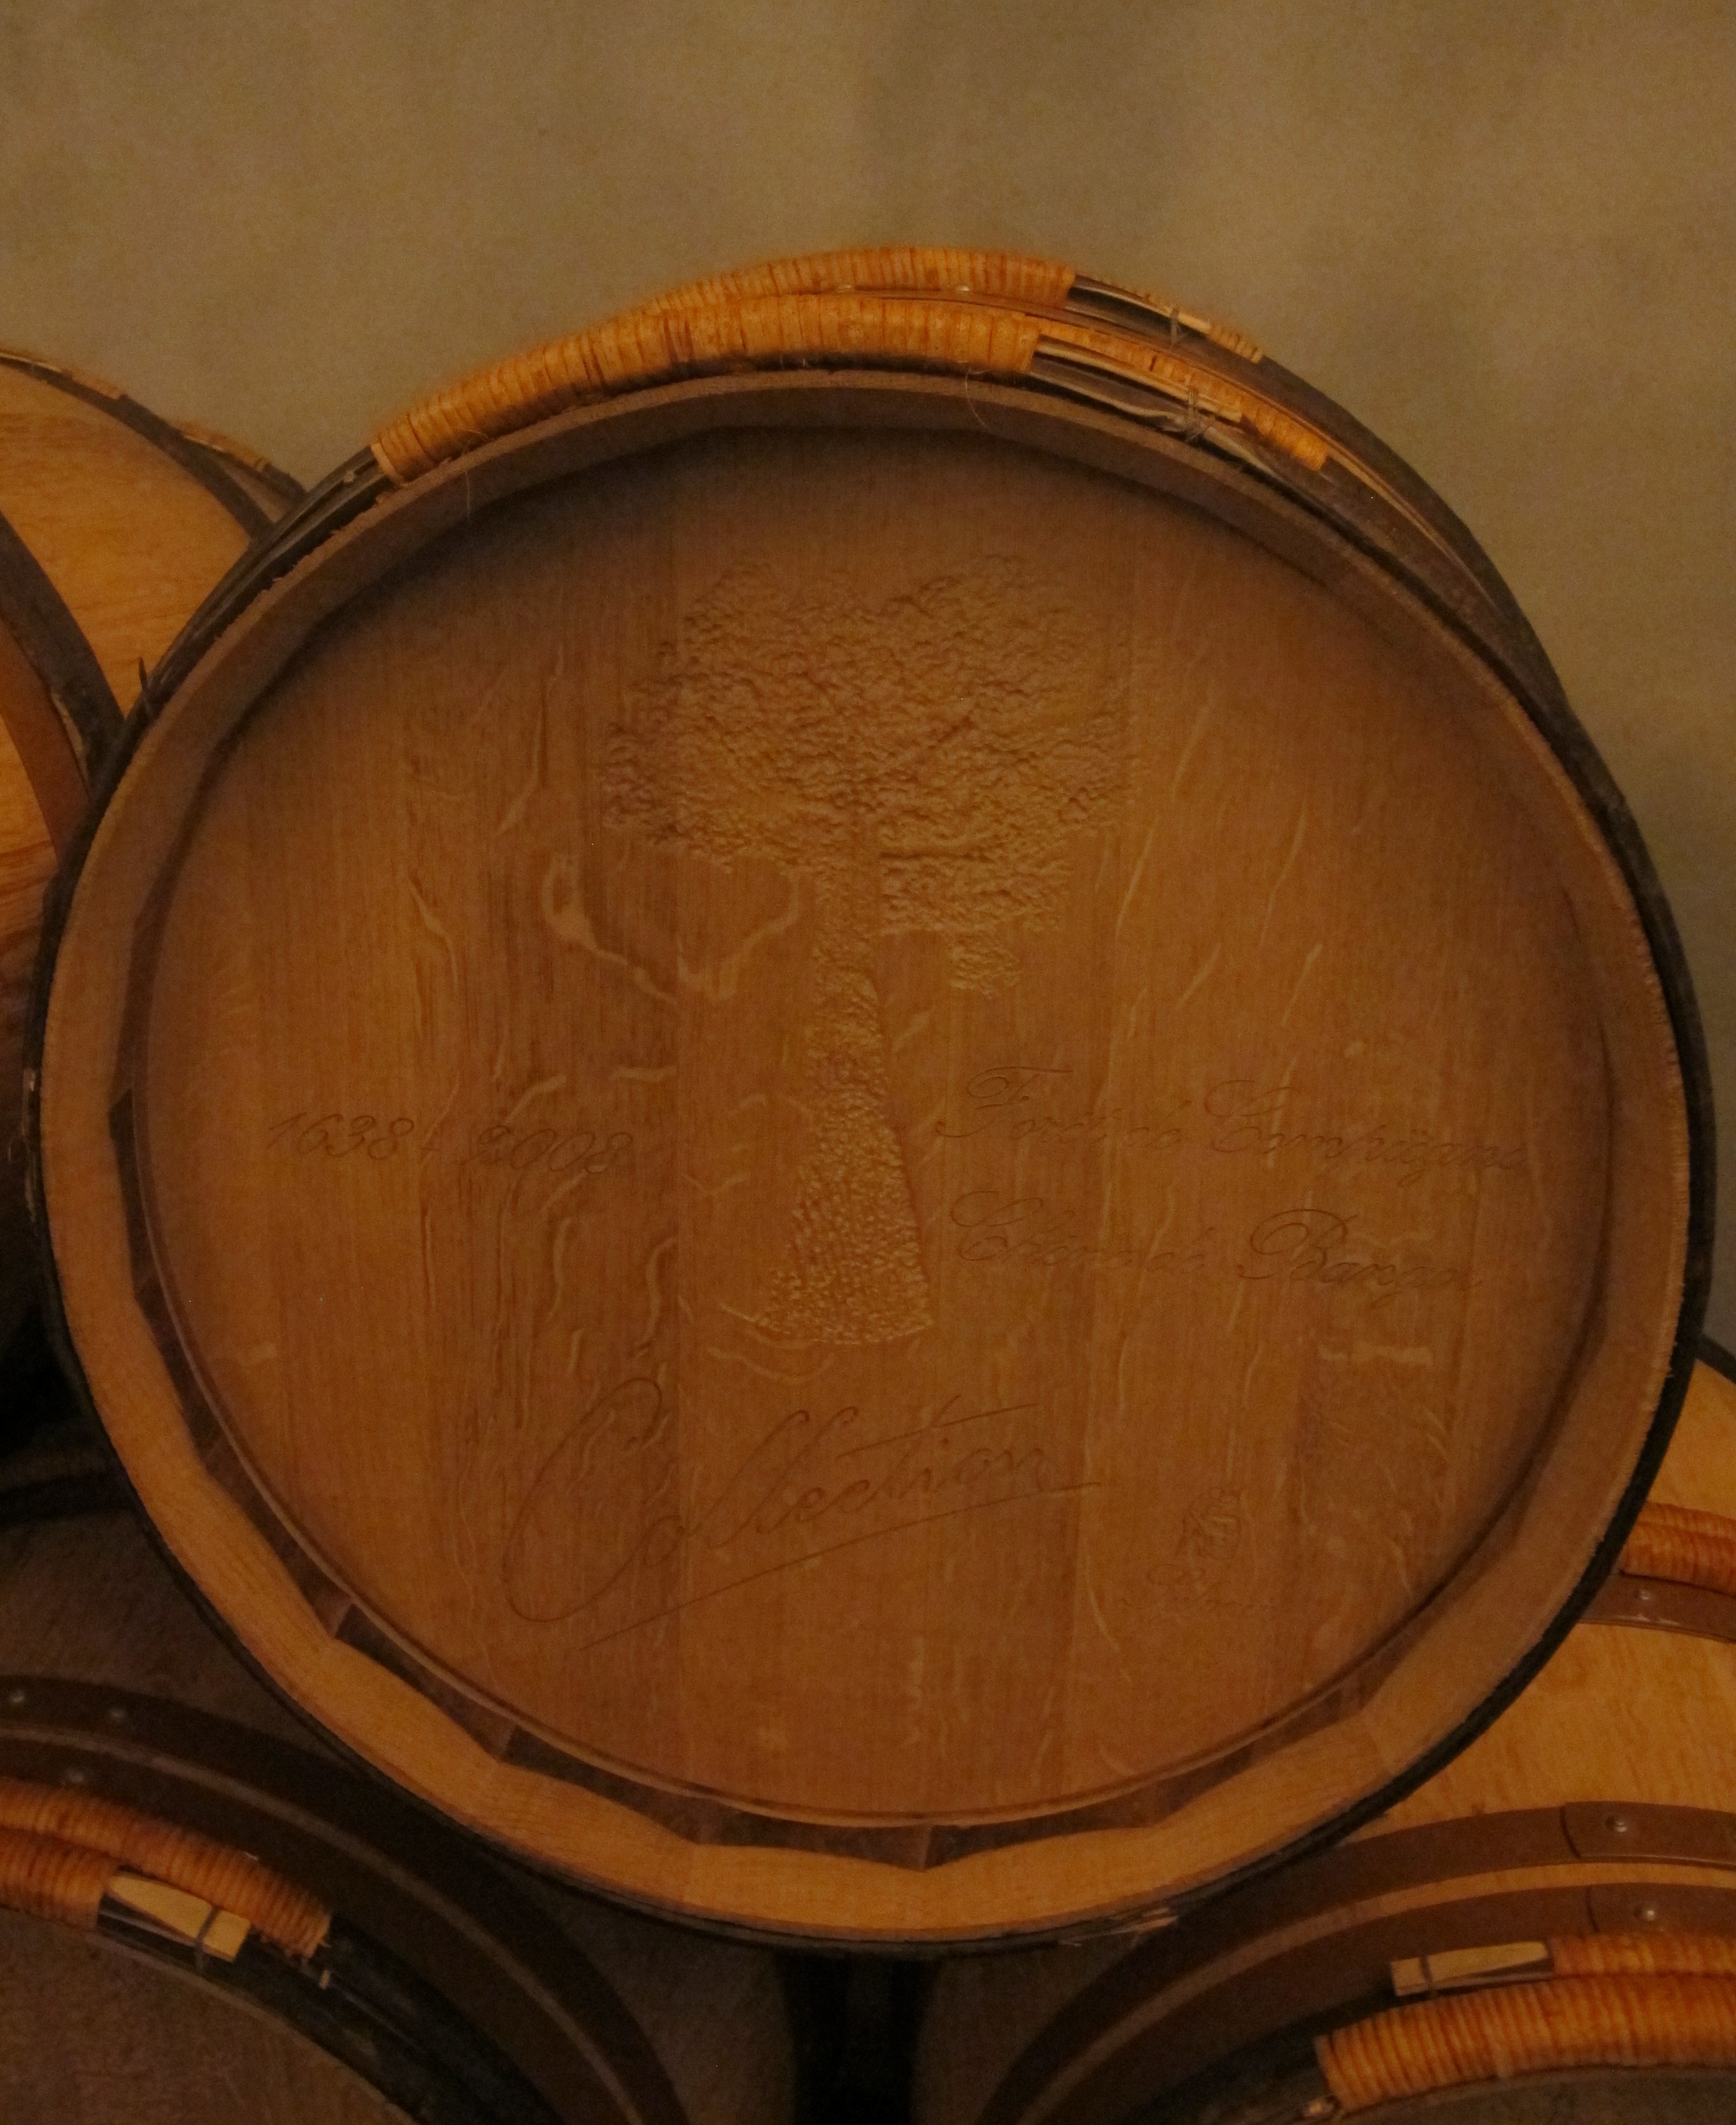 Beautifully carved wooden barrel.